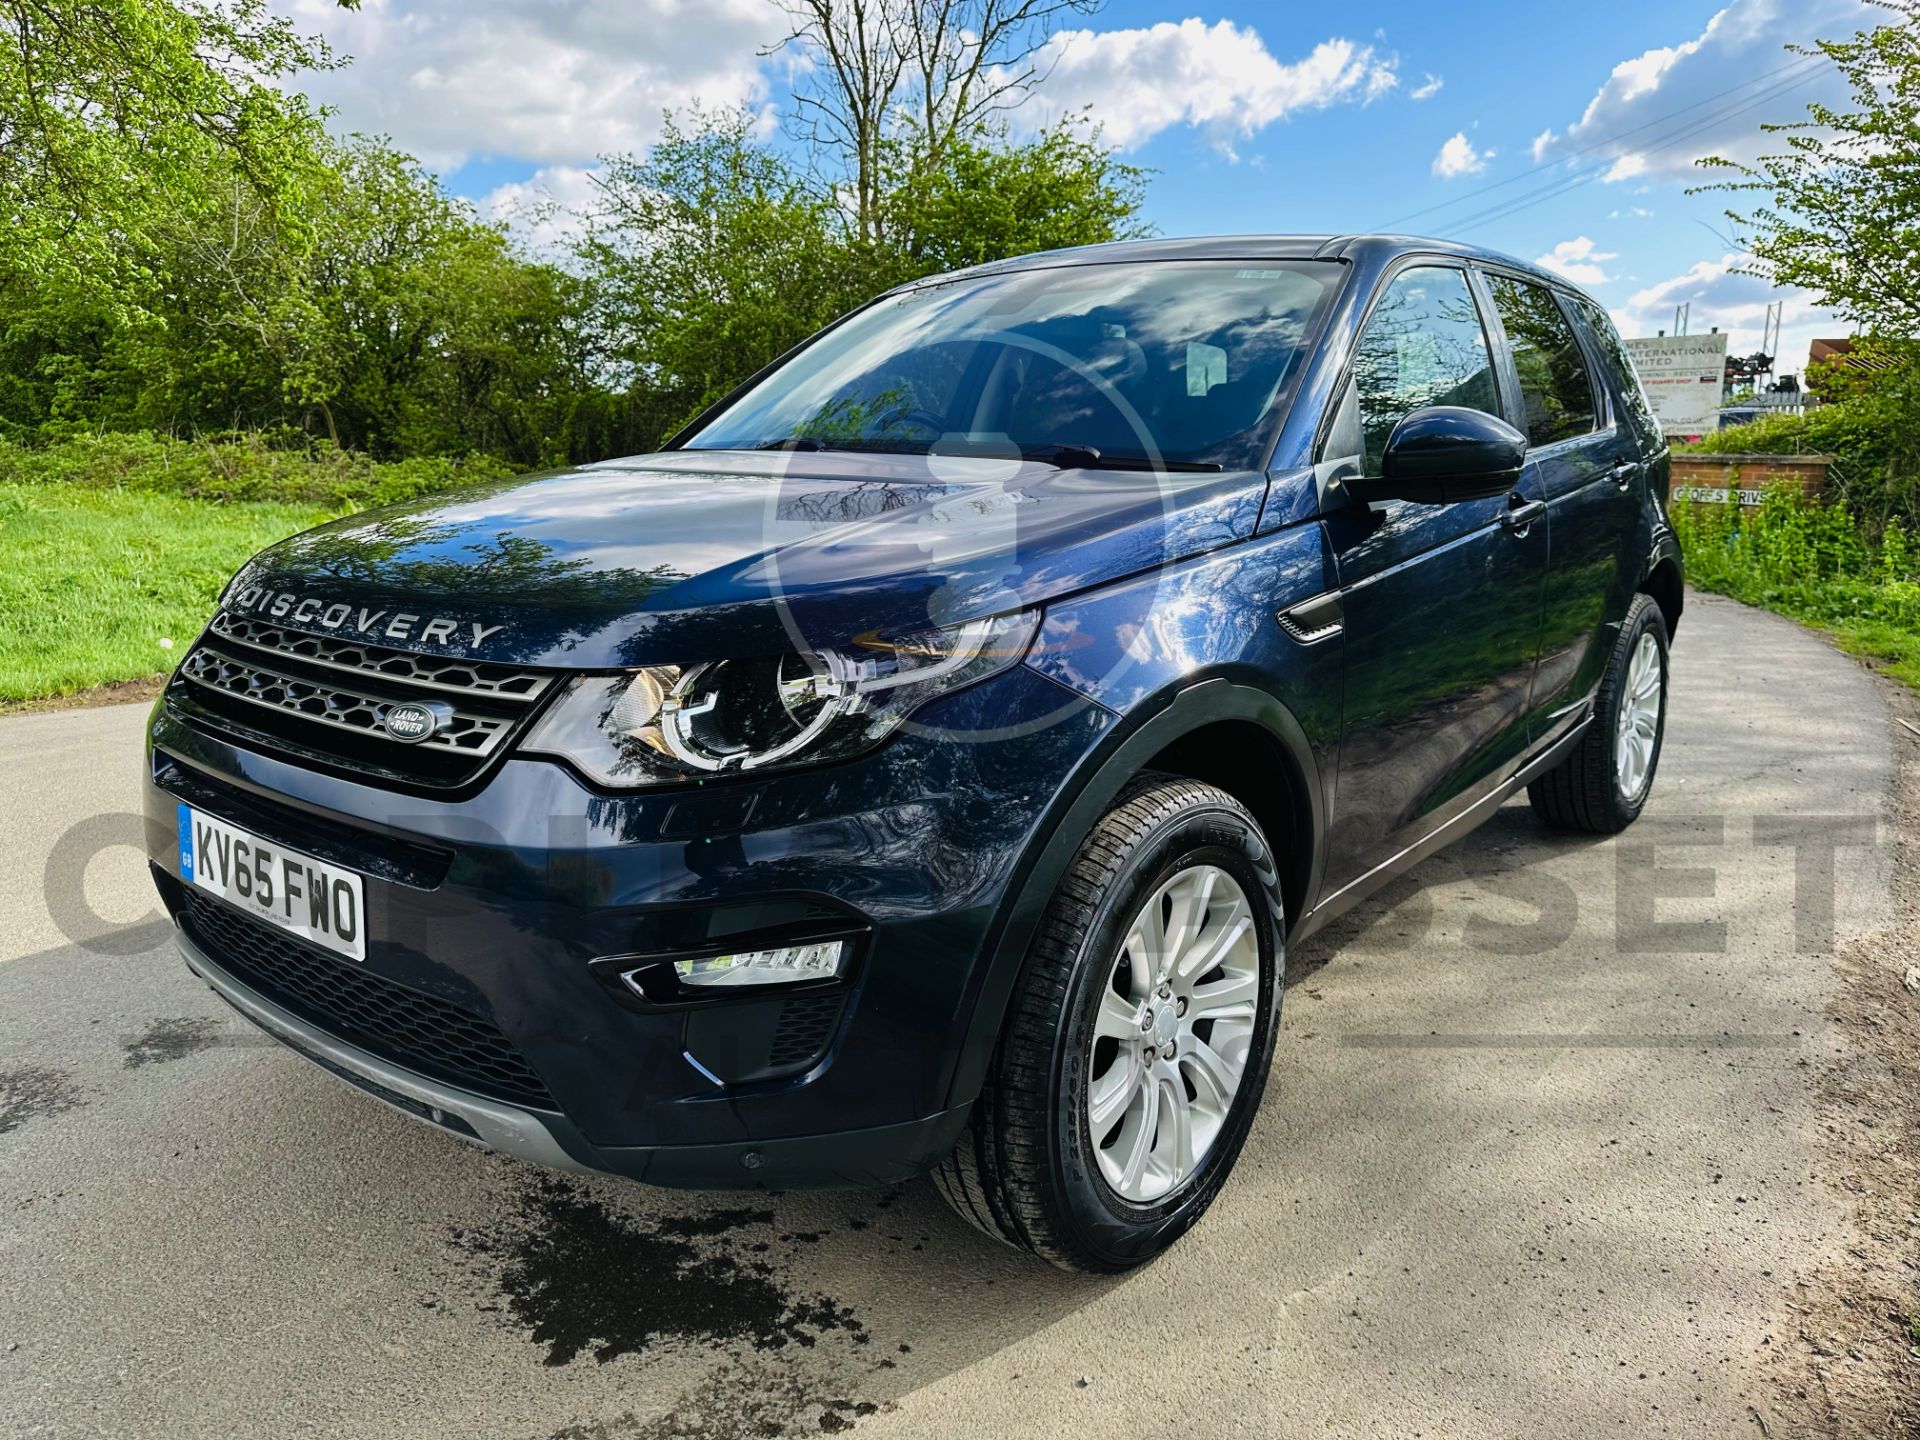 (ON SALE) LAND ROVER DISCOVERY SPORT *SE TECH* 7 SEATER SUV (2016 - EURO 6) 2.0 TD4 - (NO VAT) - Image 4 of 40